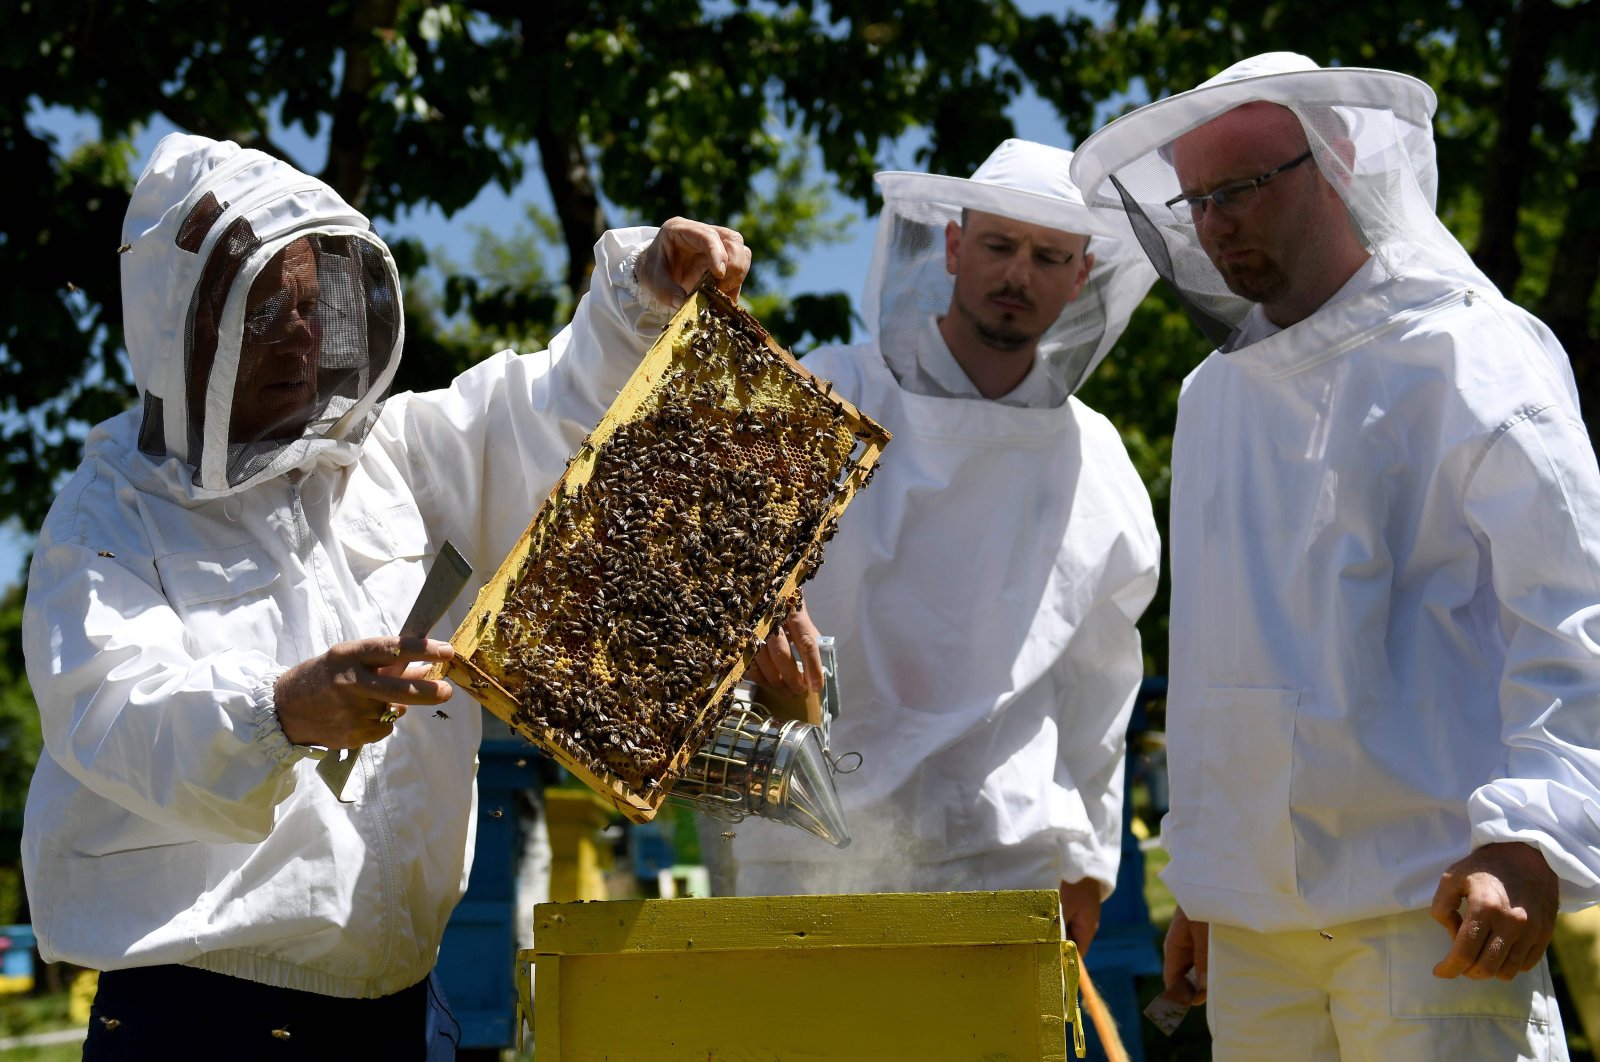 Beekeeper Gezim Skermo (L), handles a beehive's frame covered in bees at the Morava farm, in the village of Plasa, near the city of Korca, Albania on May 13, 2020. (AFP Photo)